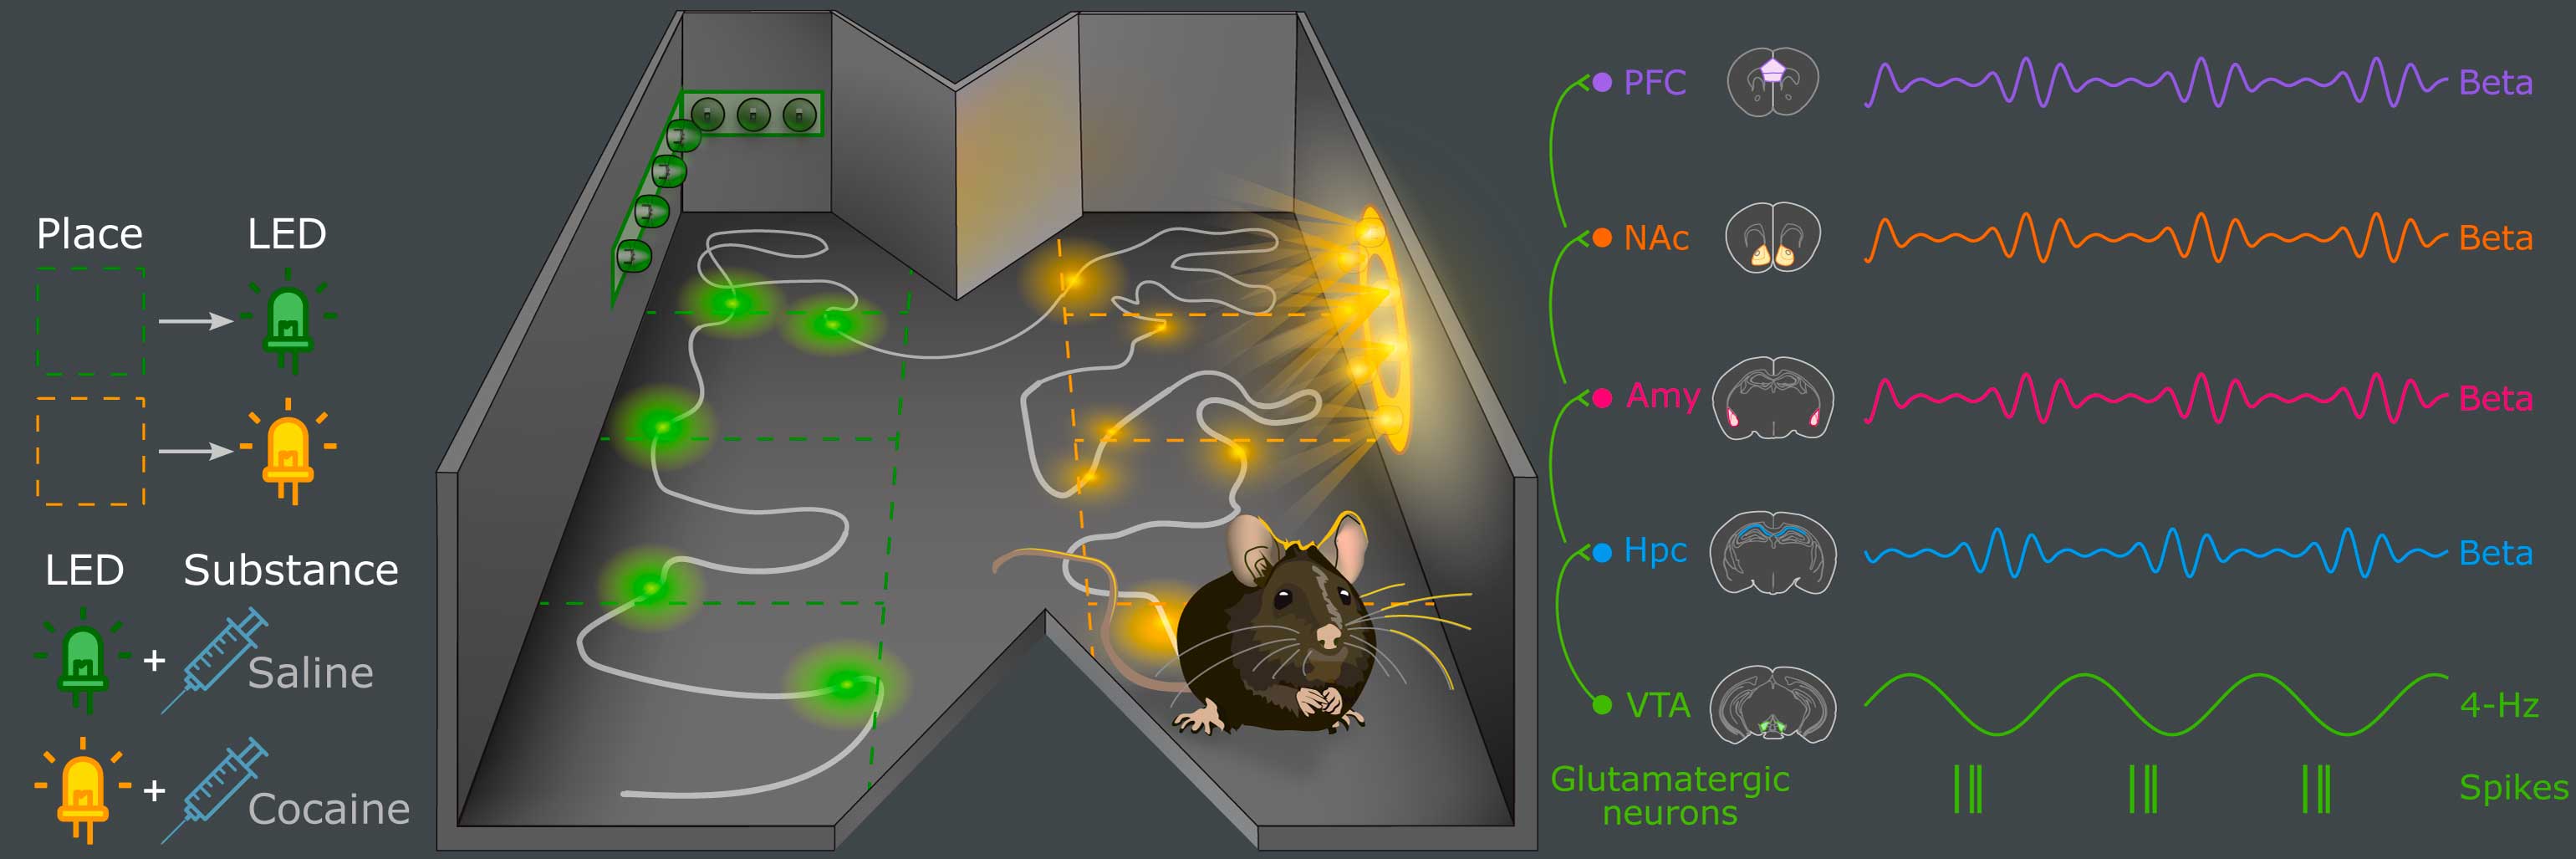 a banner image showing a mouse in an arena in the middle, with legned on left showing place is related to the LED that will illuminate, and a second part with LED colour related to substances administered- cocaine or saline. The electrical activity of brain areas is shown on the left.